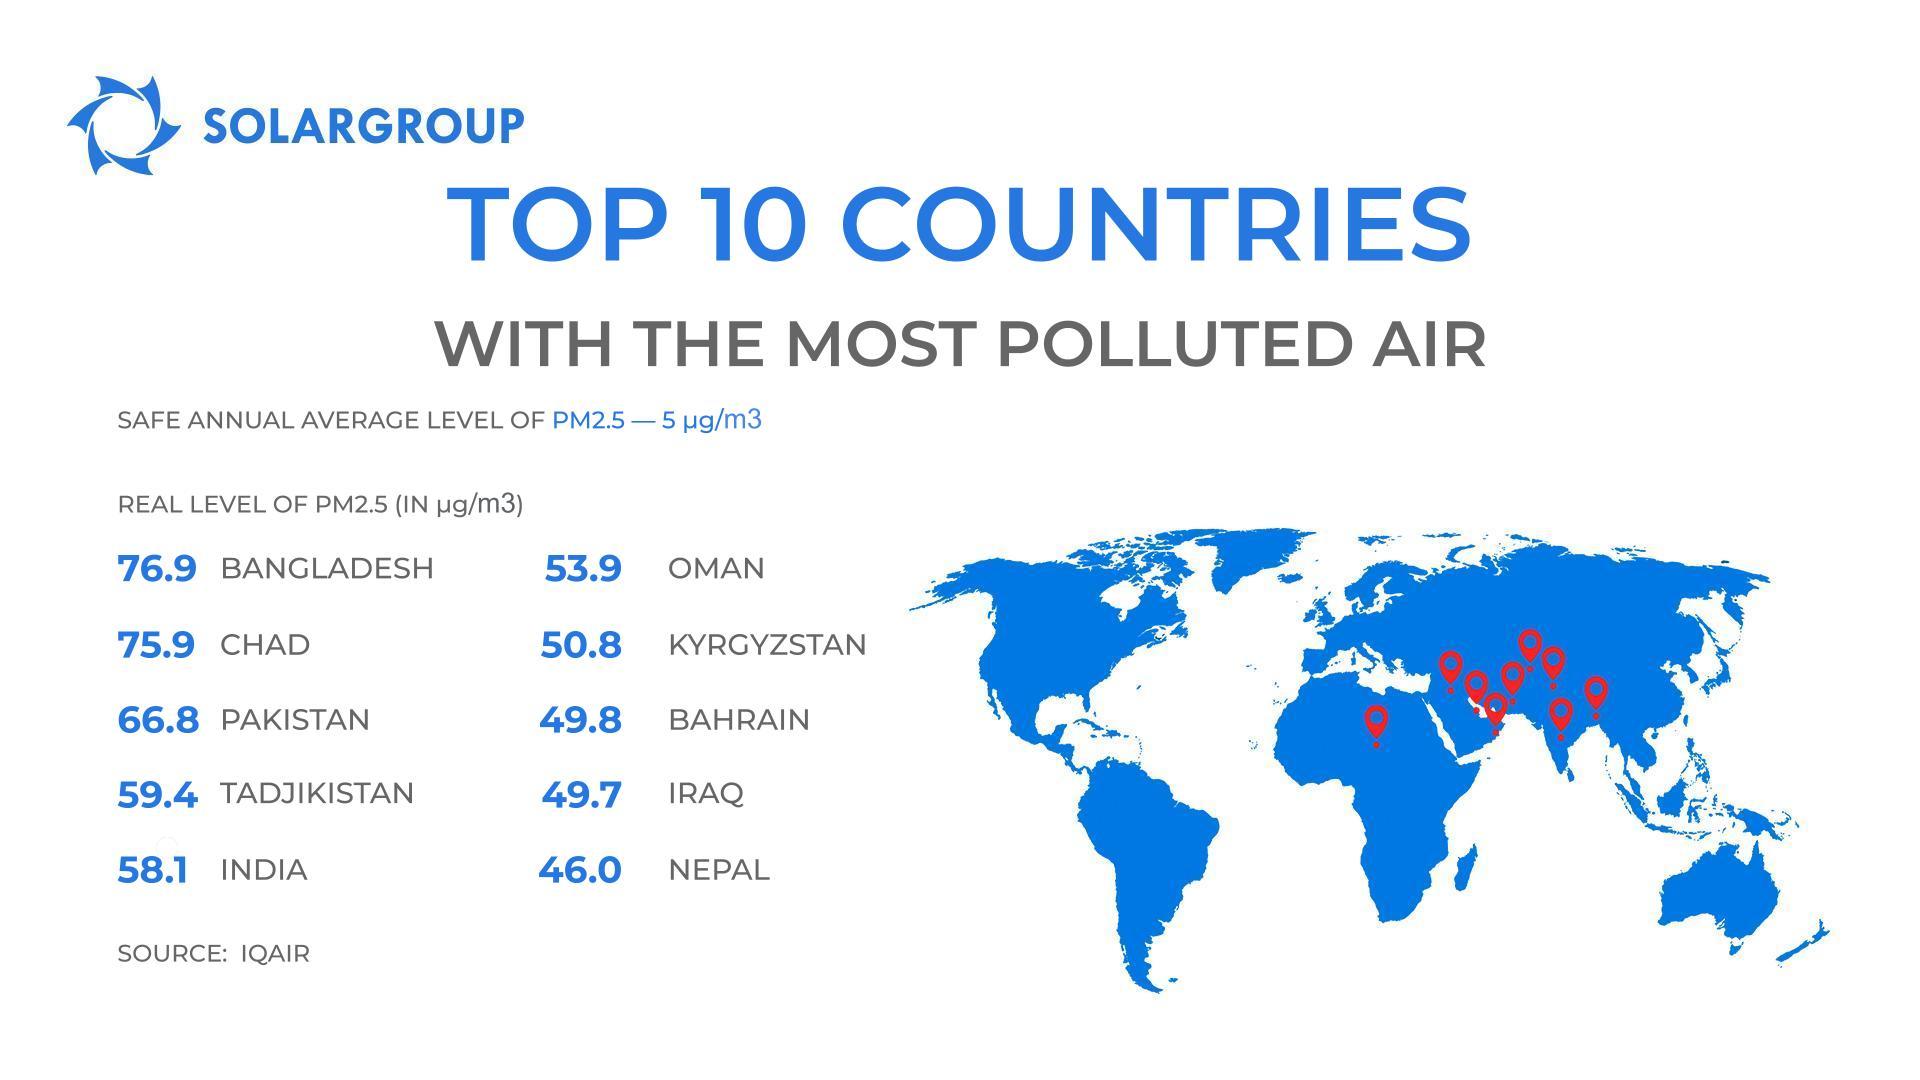 It's hard to breathe and you can see the air here: the dirtiest countries on the planet